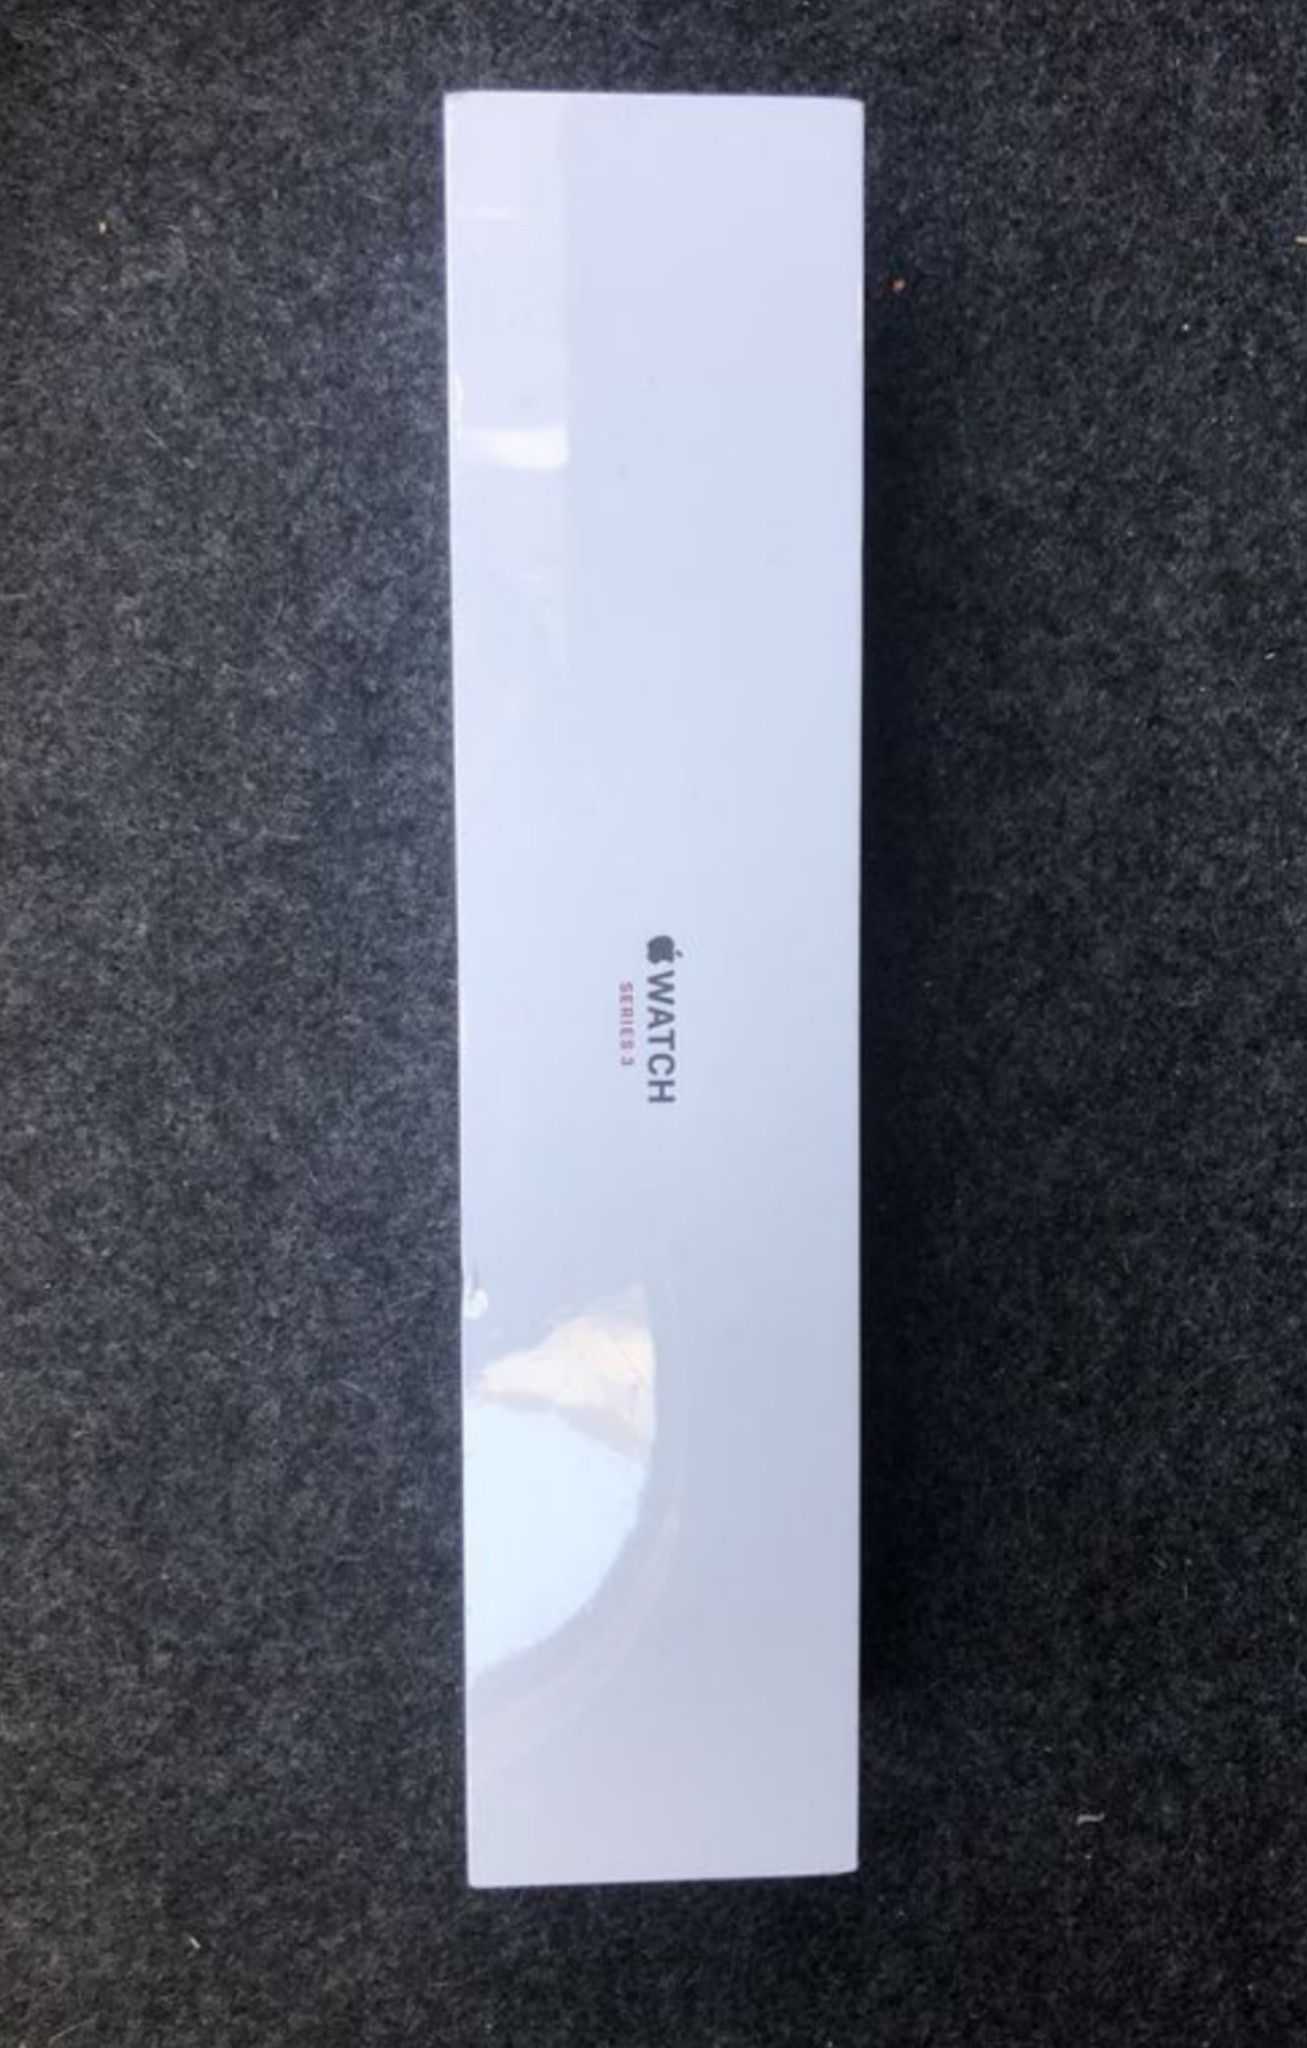 Brand New in box apple watch series 3 with LTE and gps